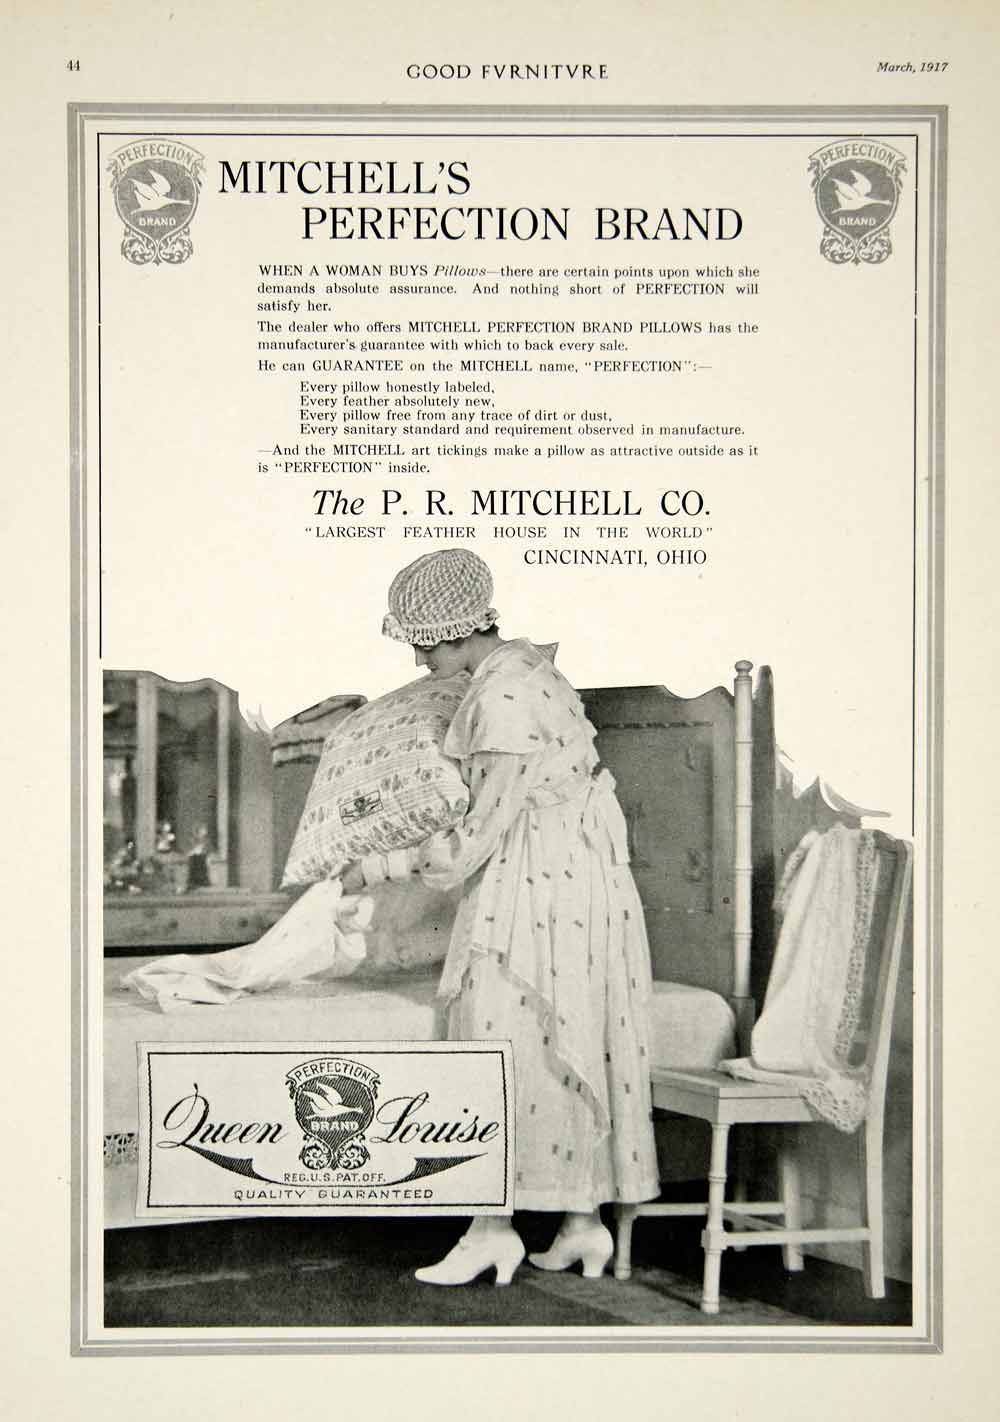 1917 Ad Vintage P. R. Mitchell Perfection Brand Feather Pillows Bed Bedroom GF5